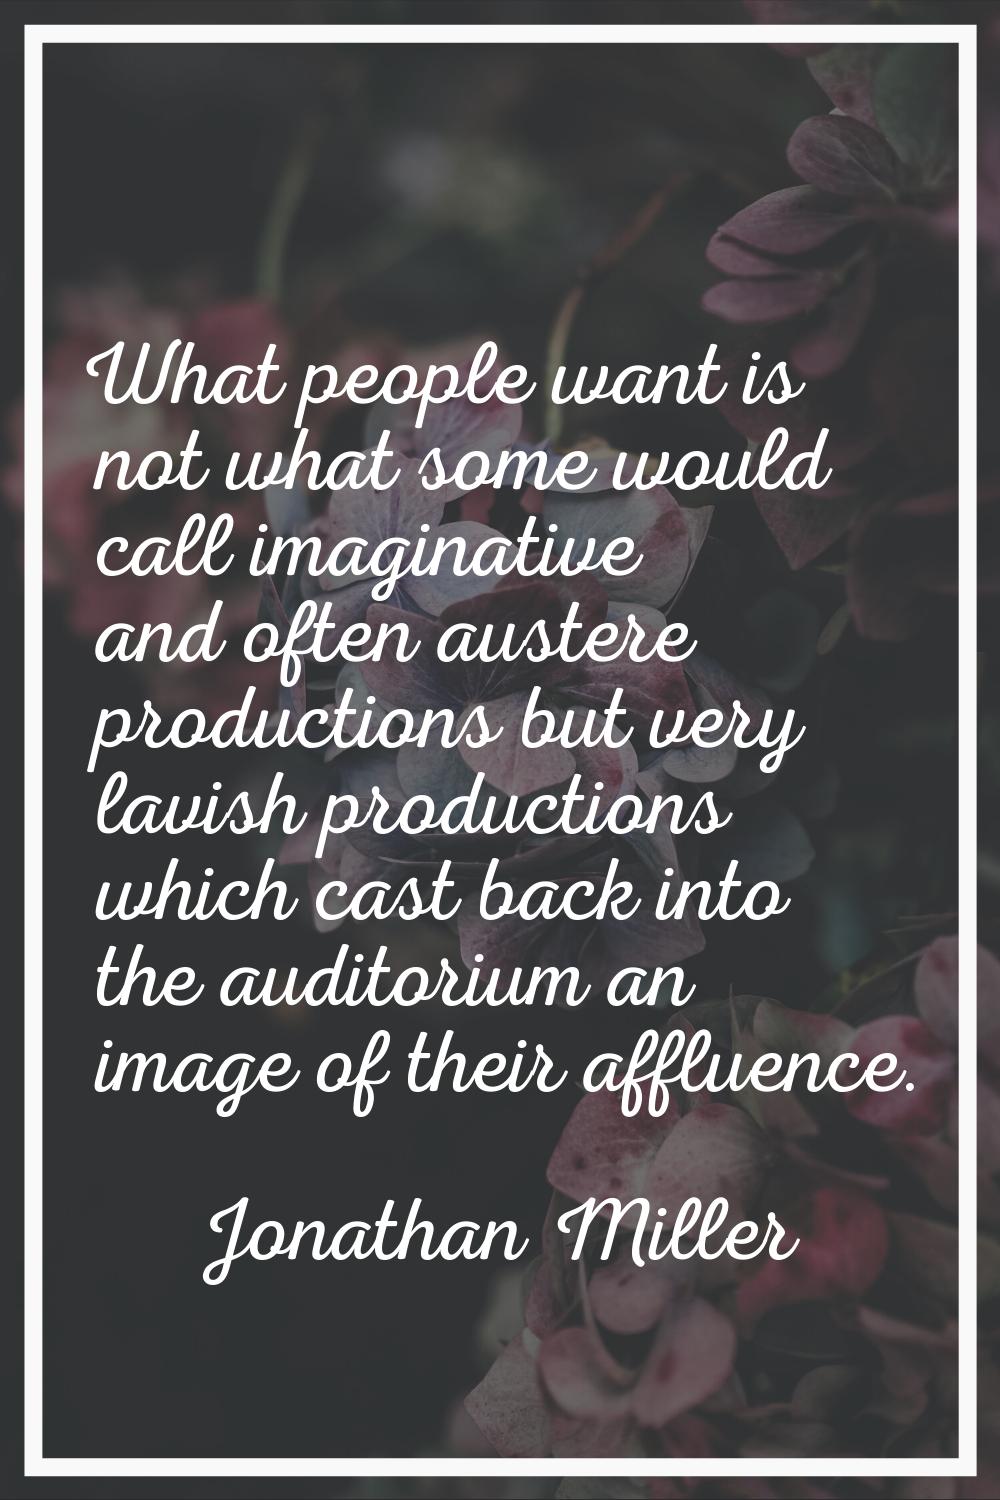 What people want is not what some would call imaginative and often austere productions but very lav